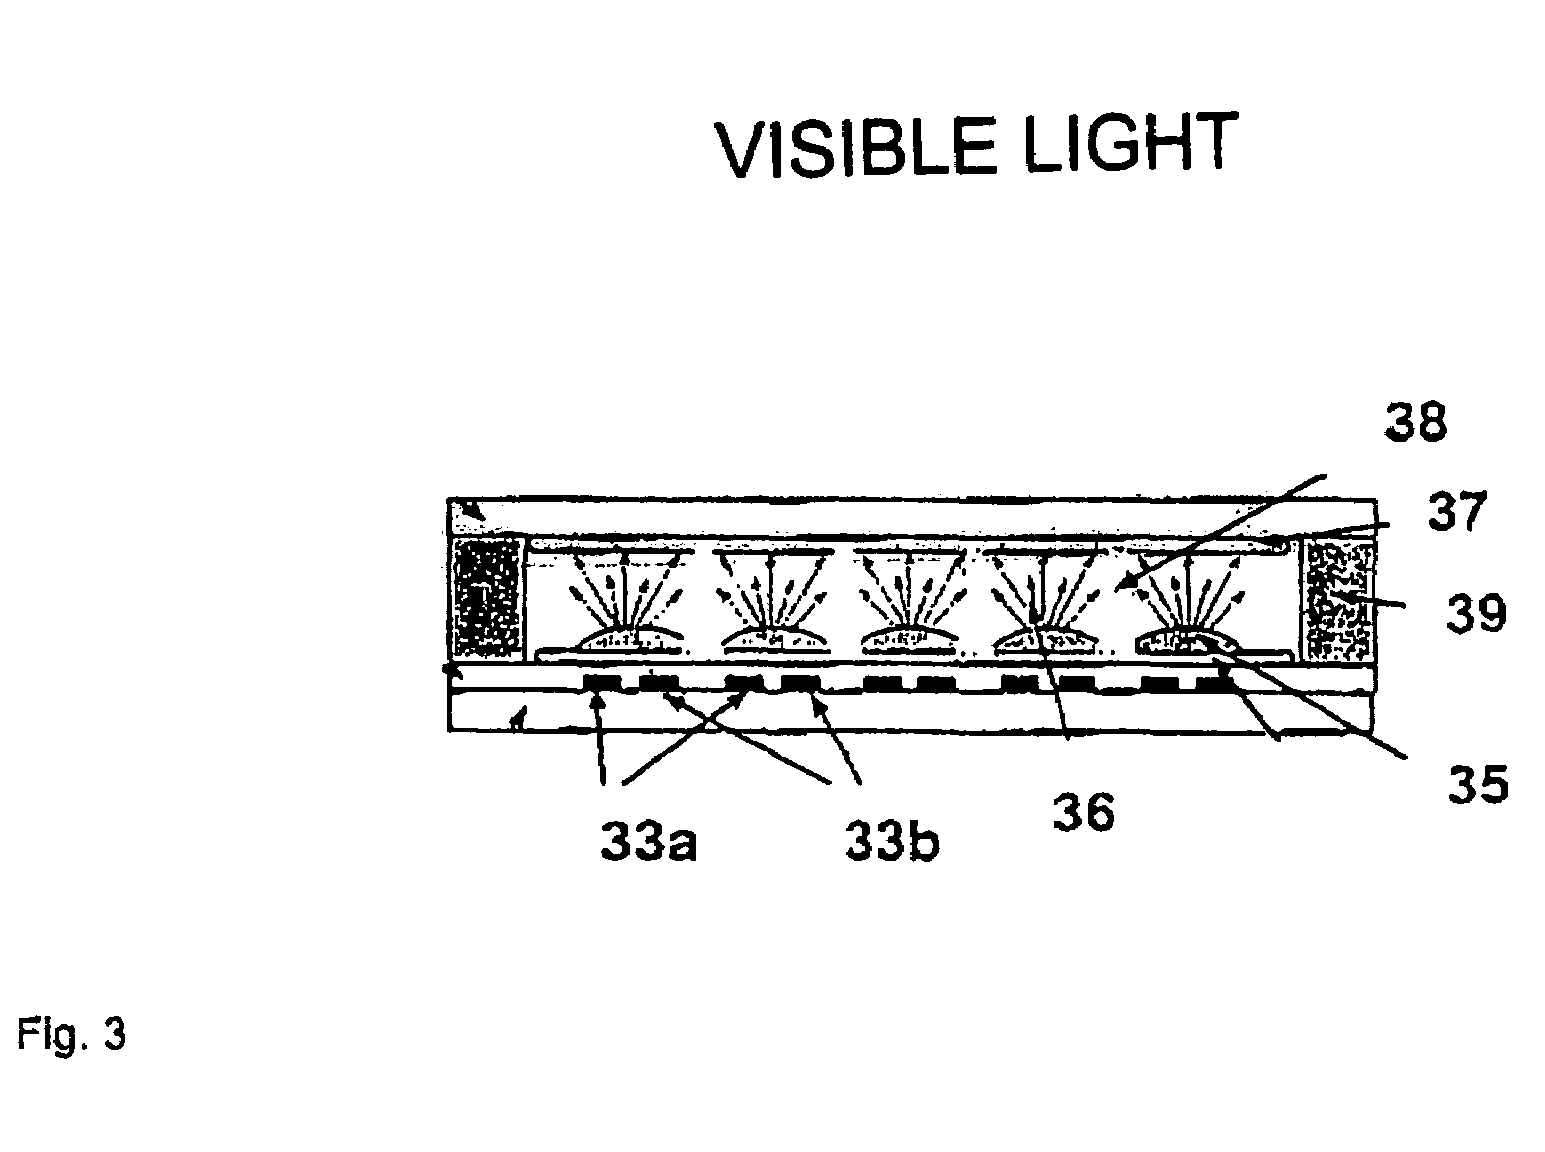 UV-absorbing borosilicate glass for a gas discharge lamp and process for manufacturing same